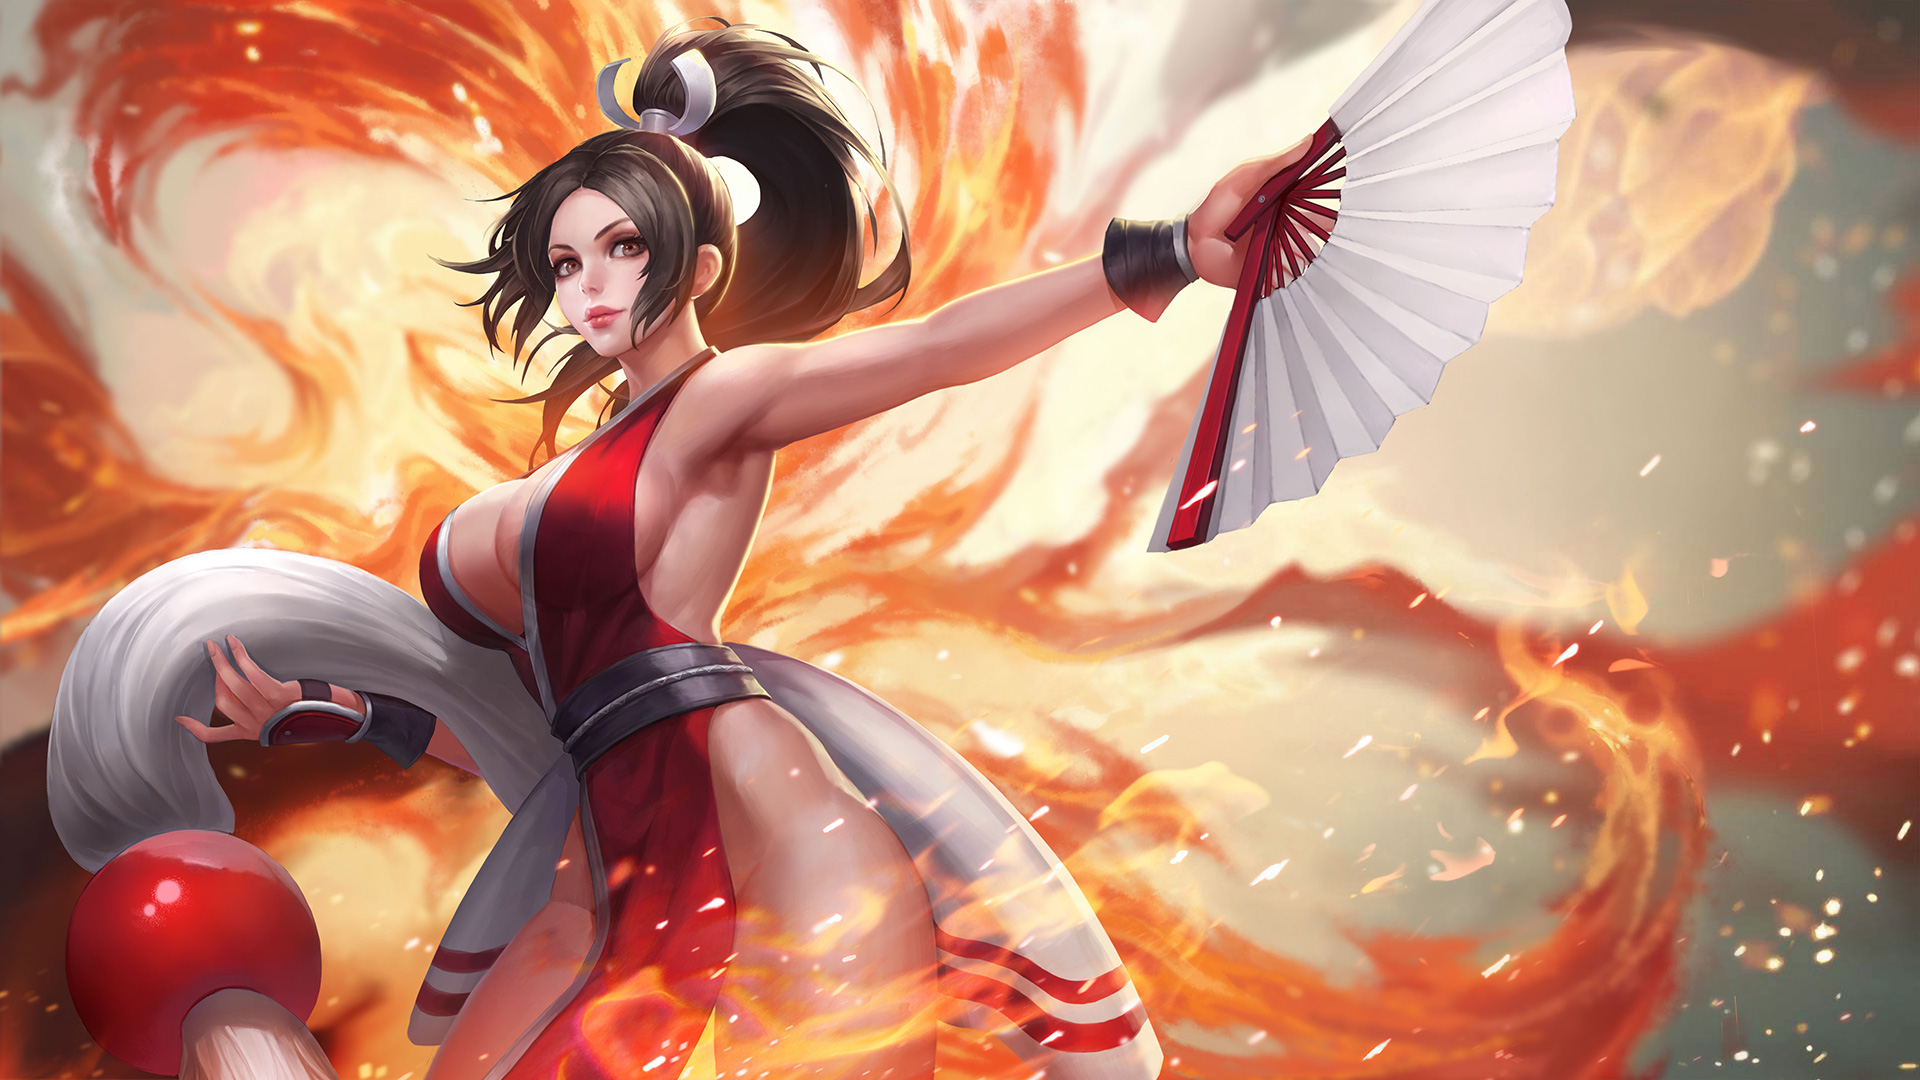 King Of Glory Mai Shiranui Dancing With Fan Formidable Weapon Made Steel  Spokes Top And Bottom Rigid And Sharp As A Razor Hd Wallpaper For Desktop  1920x1080 : 